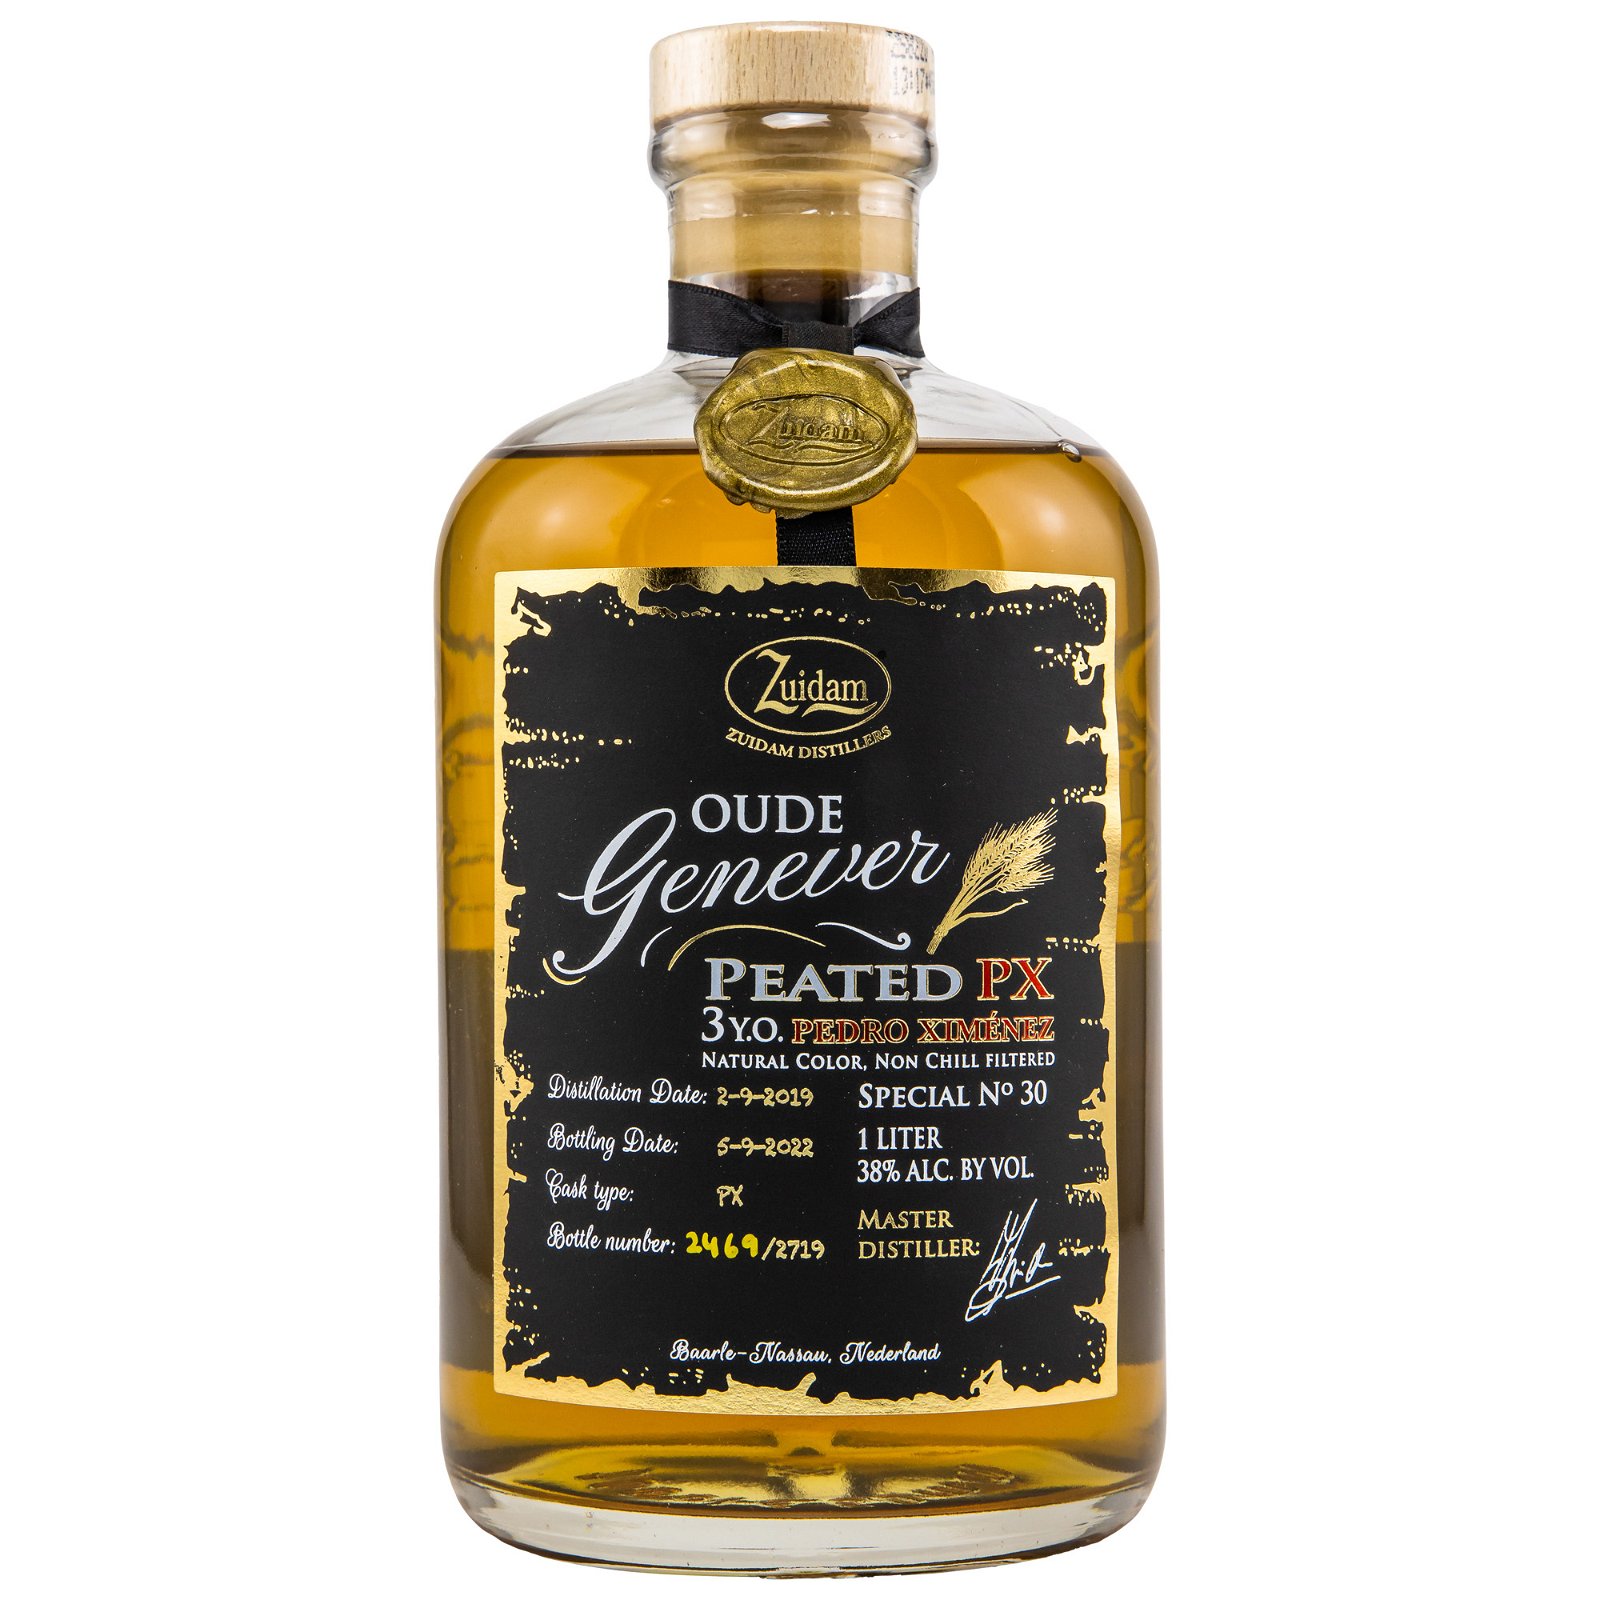 Zuidam 2019/2022 - 3 Jahre Oude Genever Peated PX Special No. 30 (Liter)